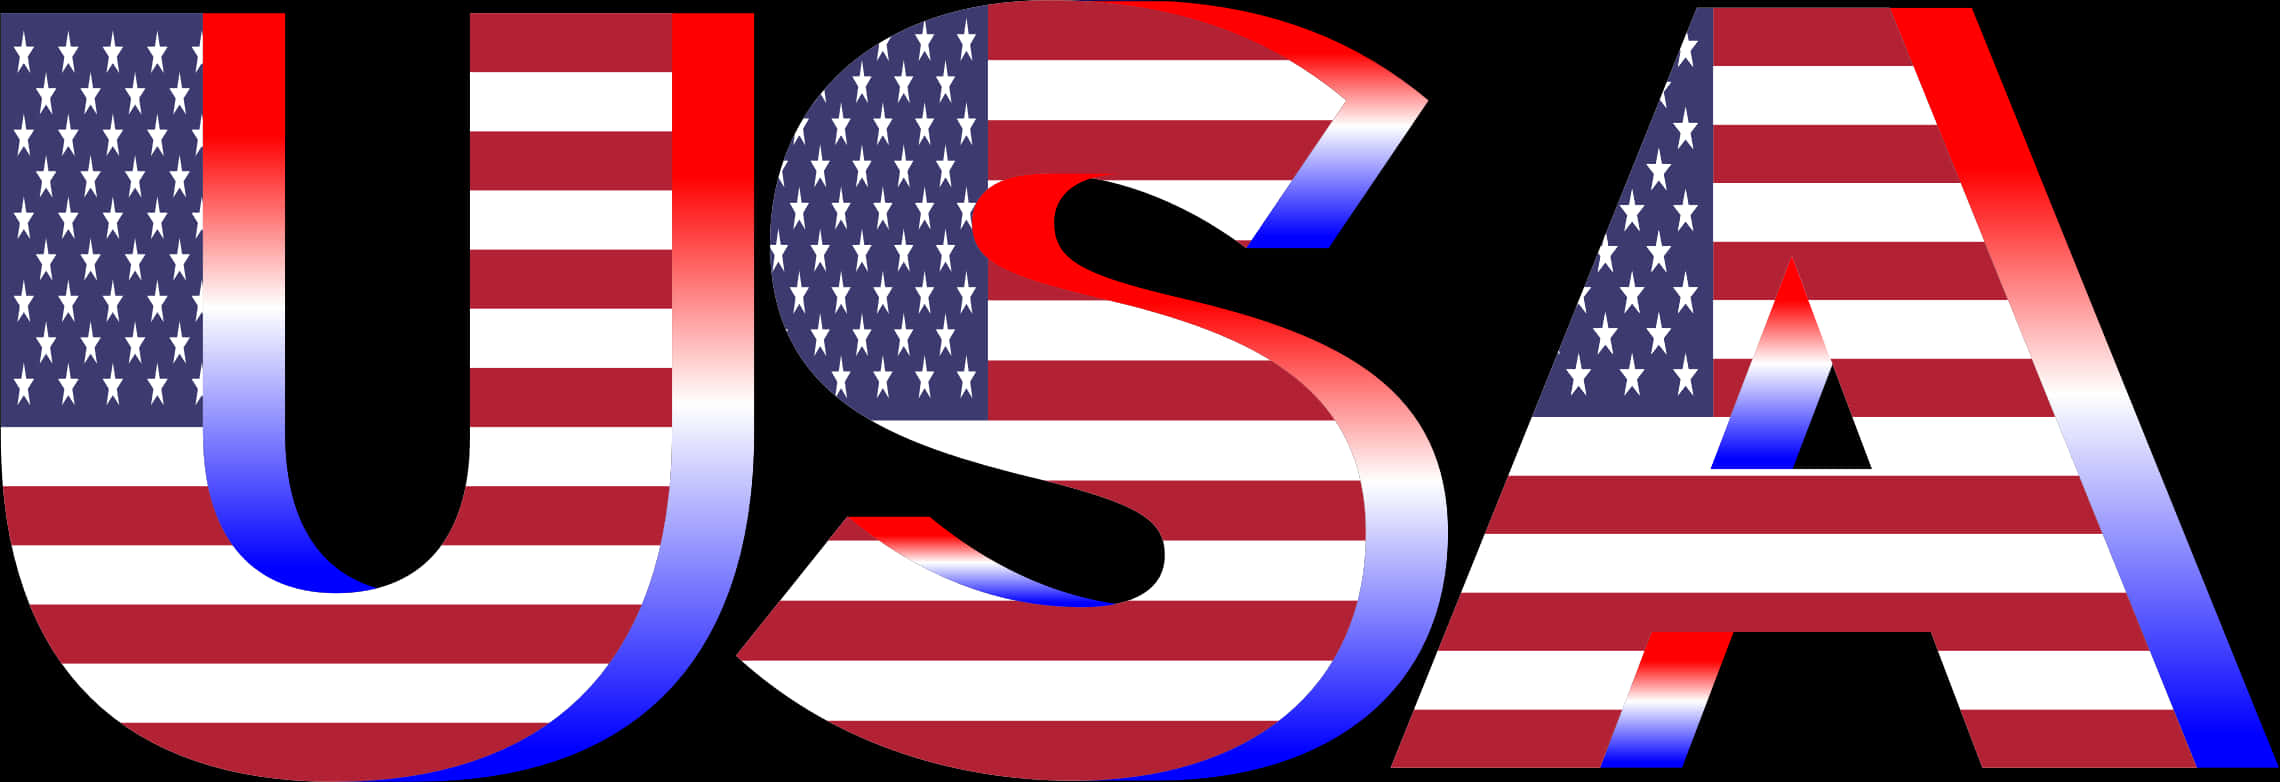 A Flag With Red White And Blue Letters